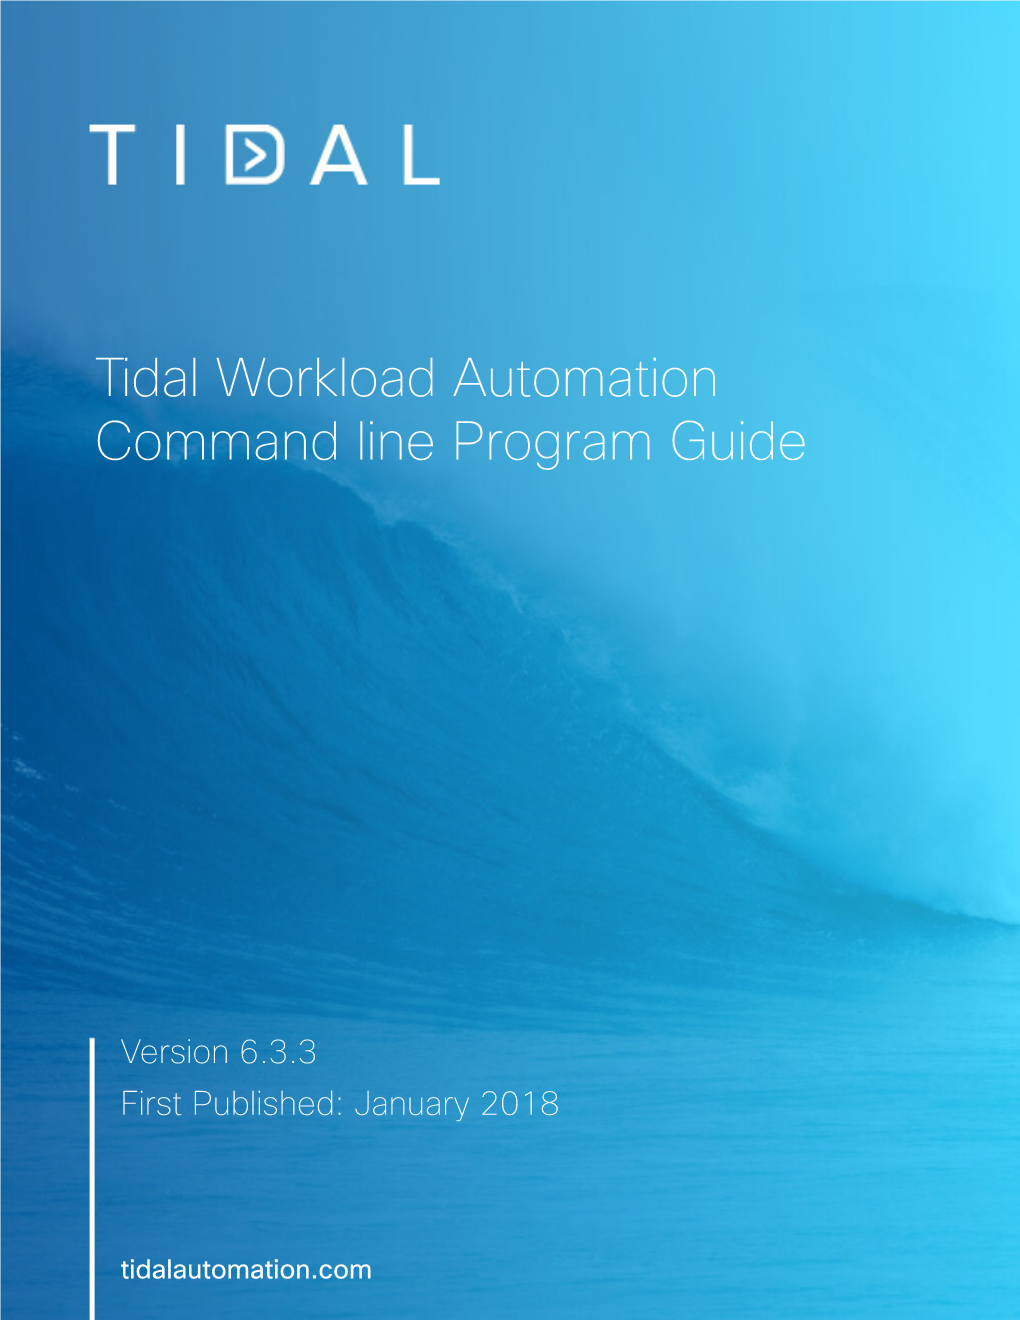 Tidal Workload Automation 6.3.3 Command Line Program Guide